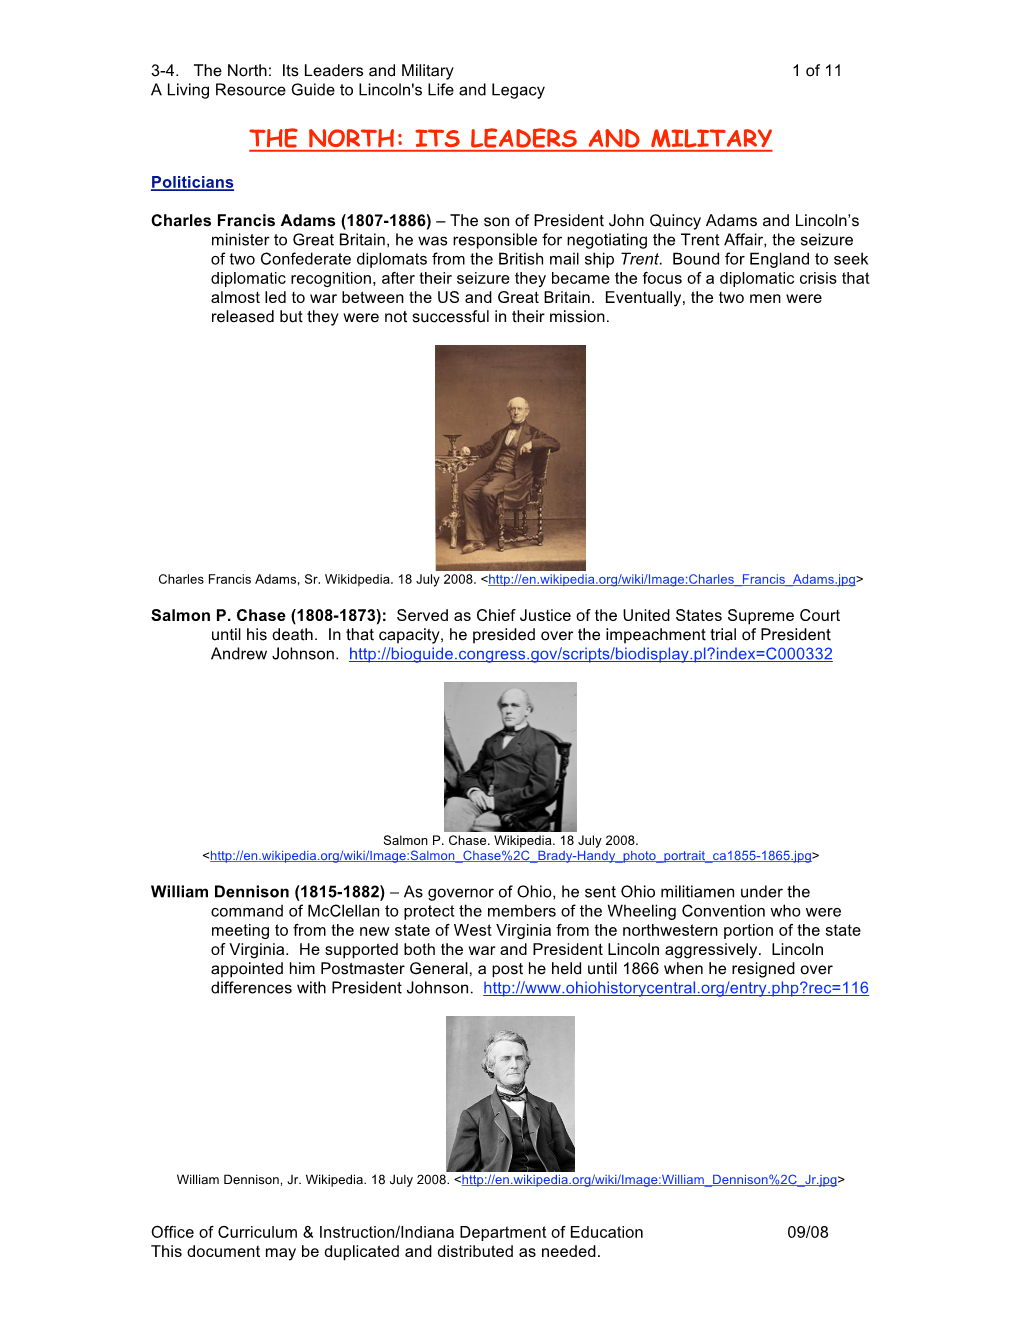 Its Leaders and Military 1 of 11 a Living Resource Guide to Lincoln's Life and Legacy